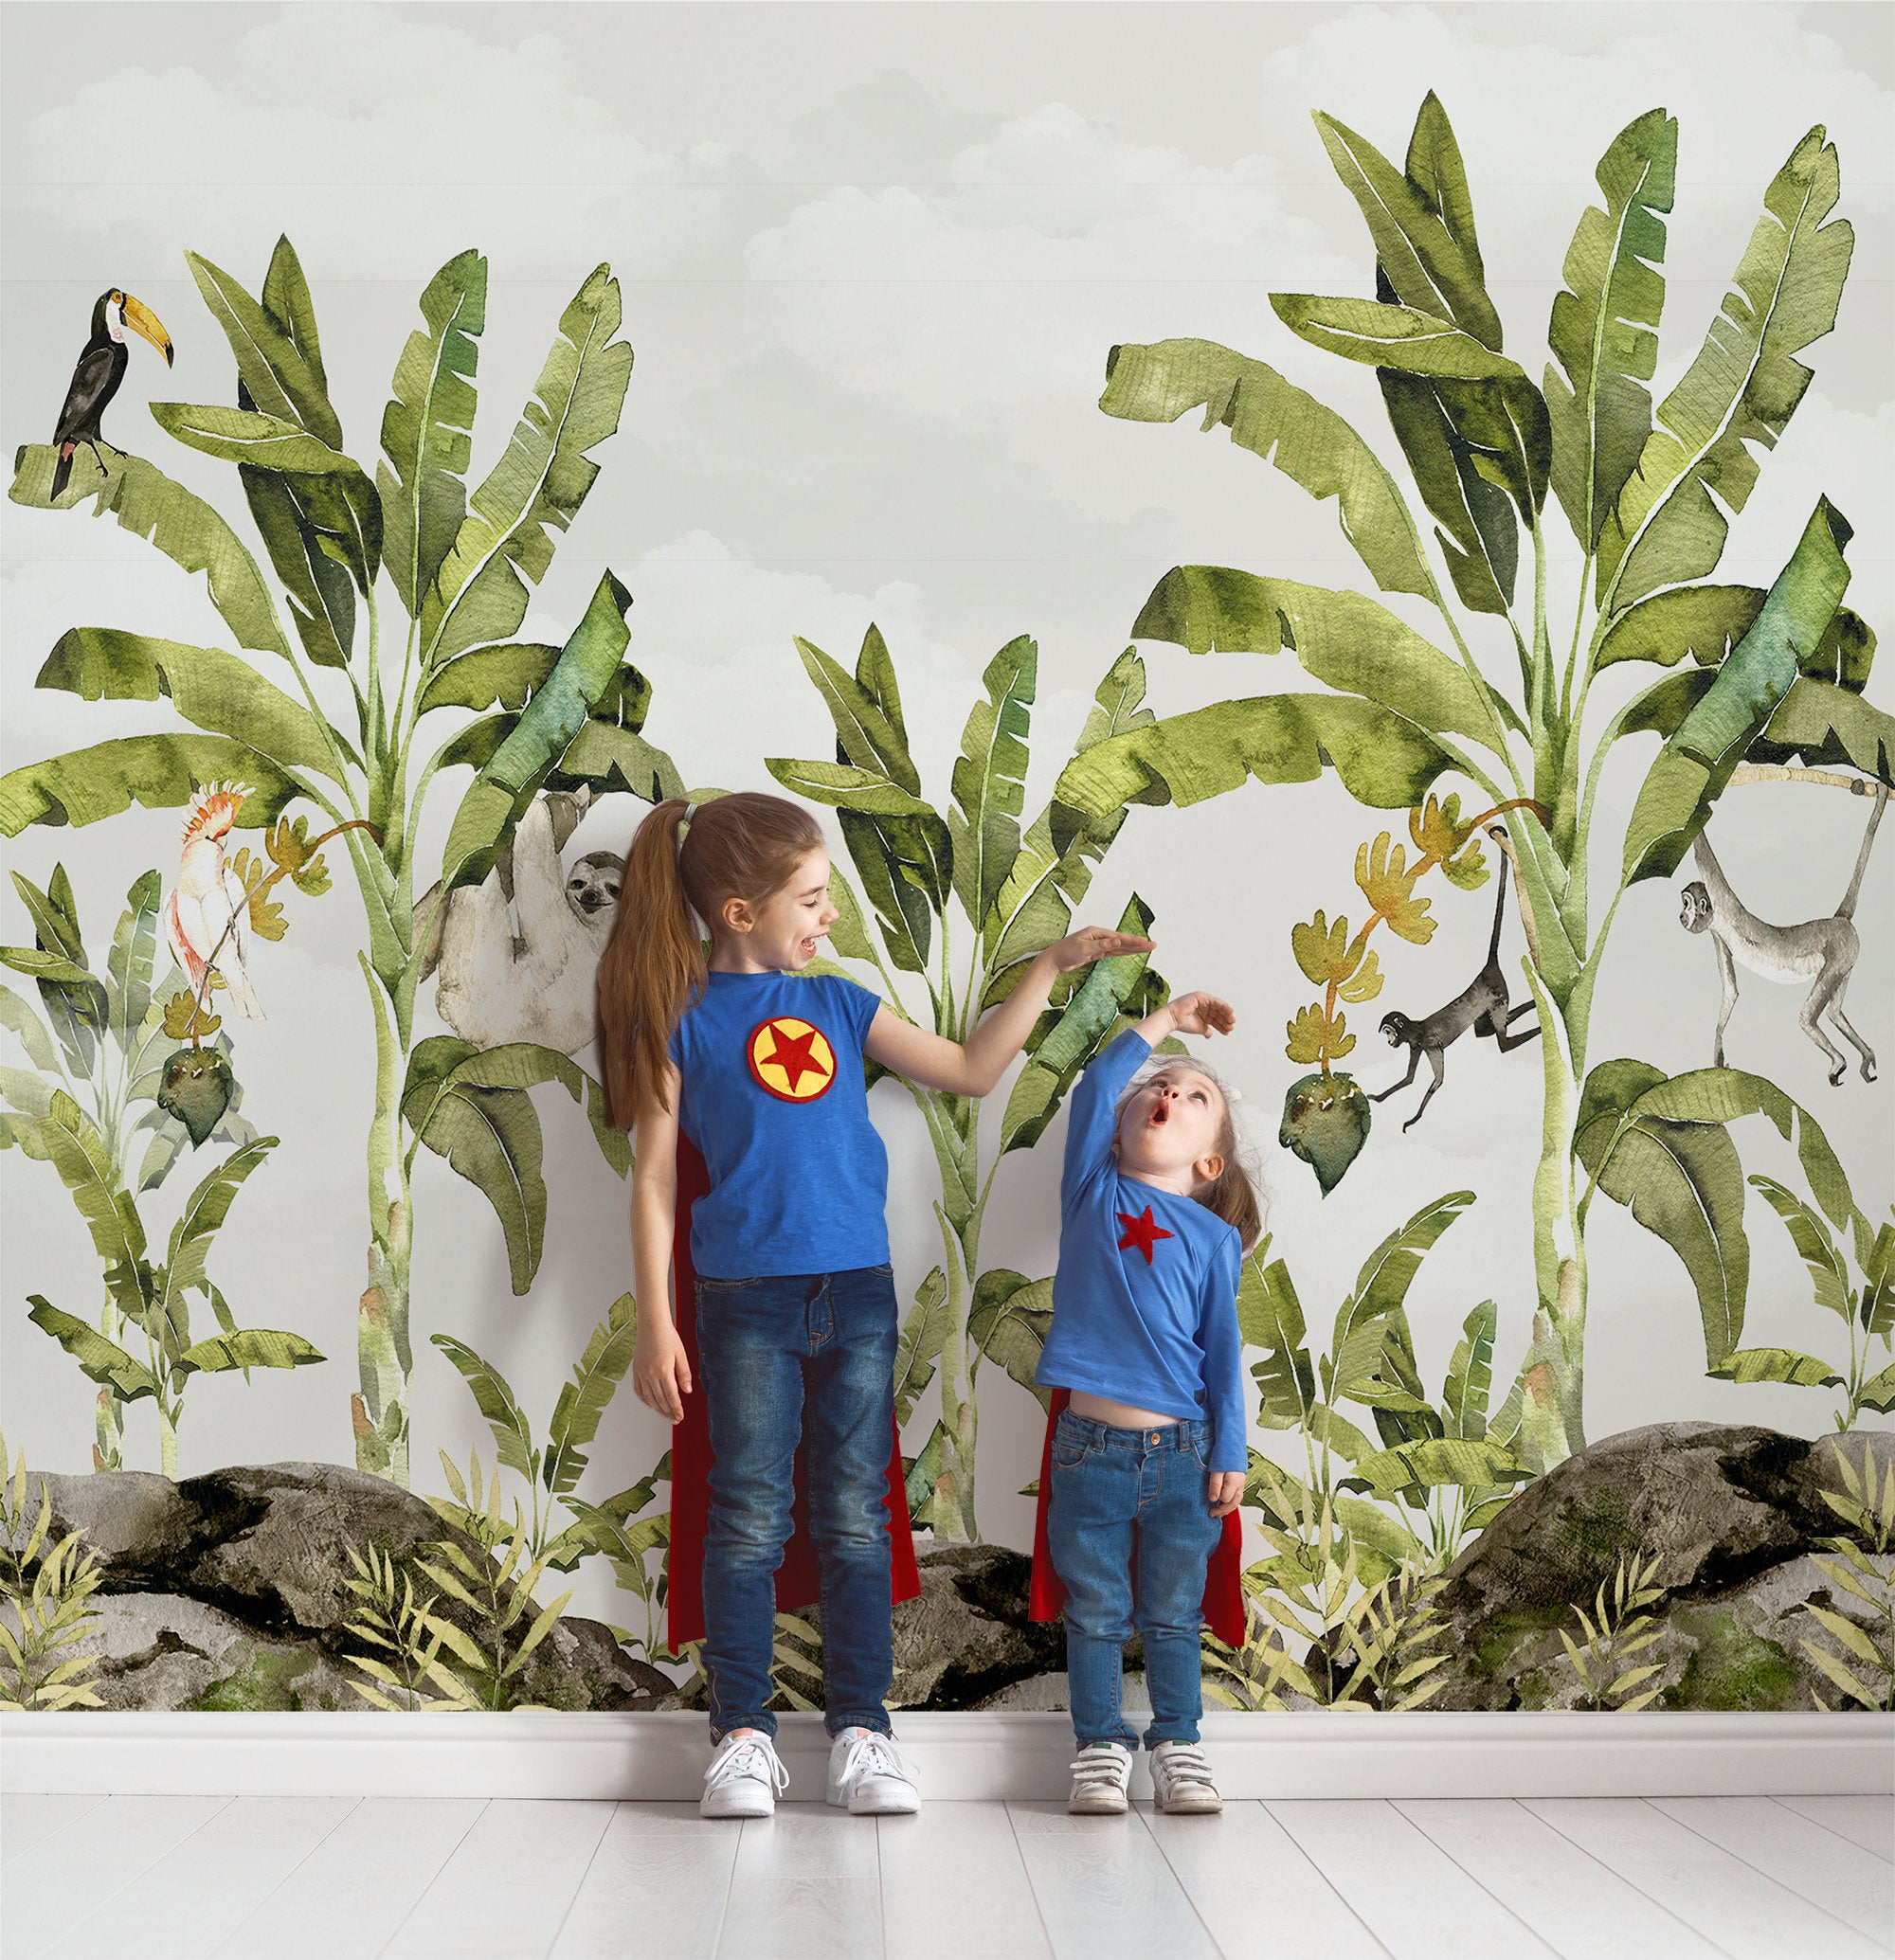 Baby Monkeys Playing on the Leaves Wallpaper Self Adhesive Peel & Stick Wall Sticker Wall Decoration Scandinavian Removable